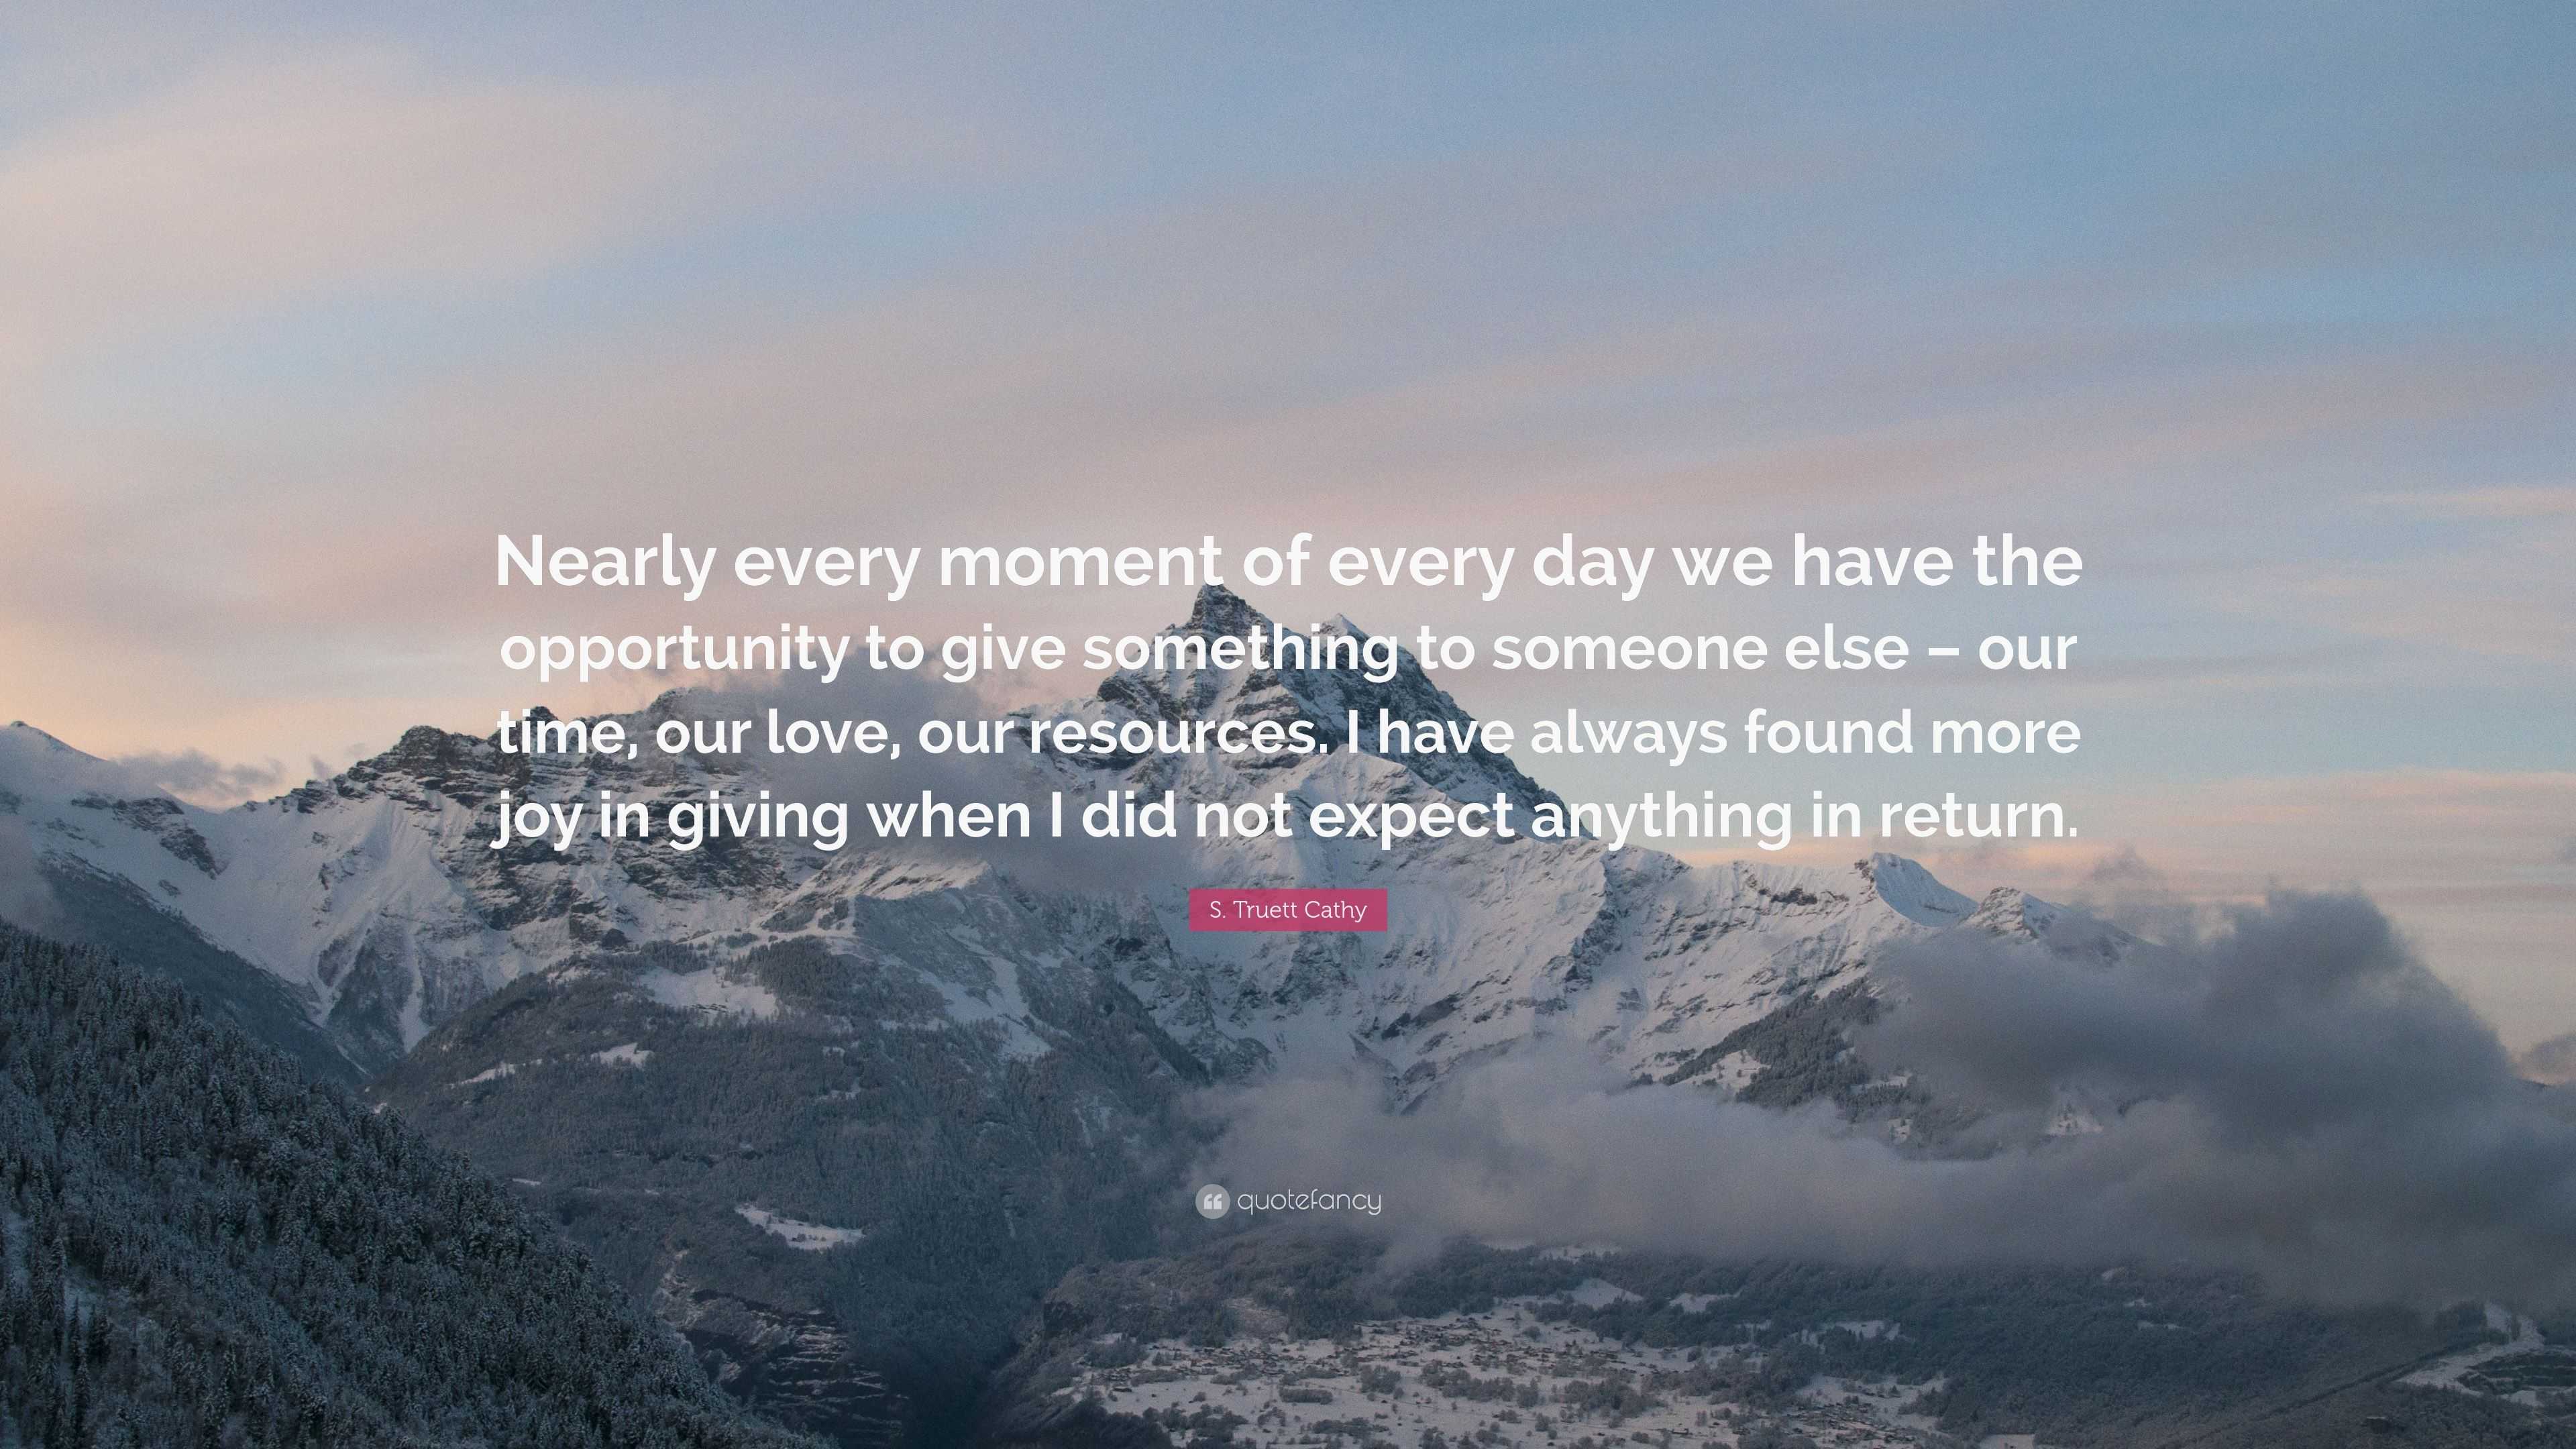 S. Truett Cathy Quote: “Nearly every moment of every day we have the ...